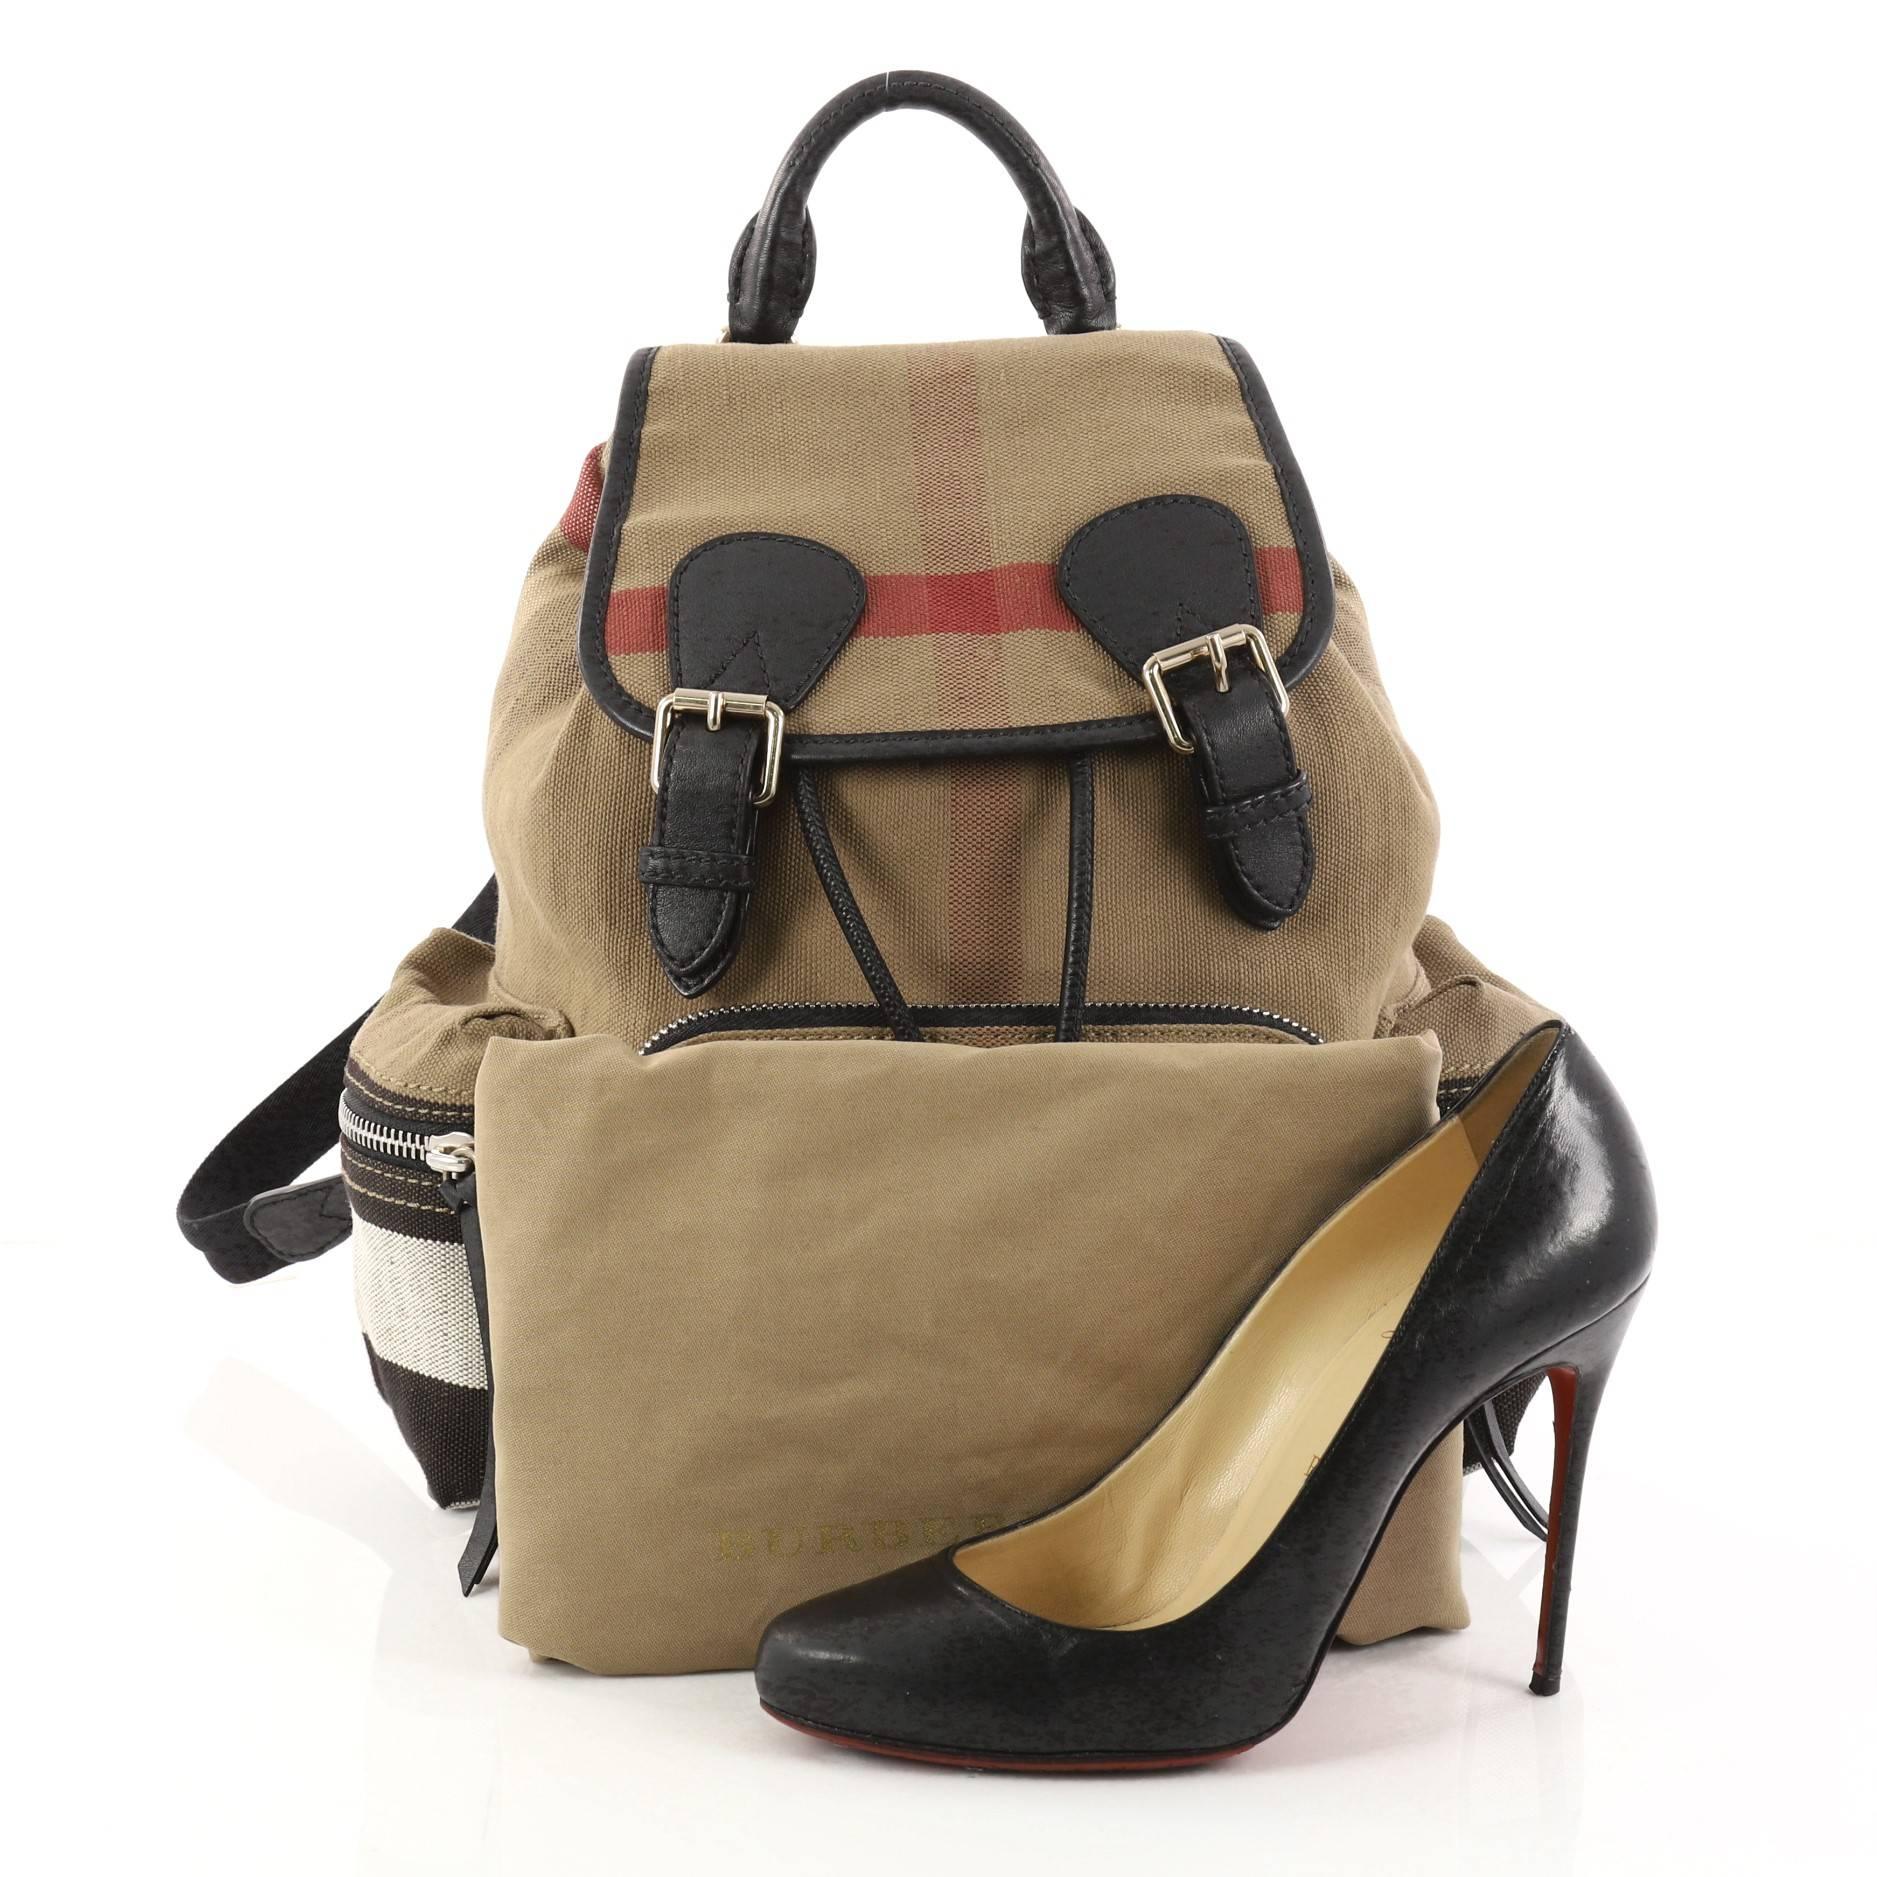 This authentic Burberry Rucksack Backpack House Check Canvas Medium is a bag that pulls off a look that's utterly utilitarian and still effortlessly cool. Crafted from house check canvas, this backpack features a leather top handle, adjustable